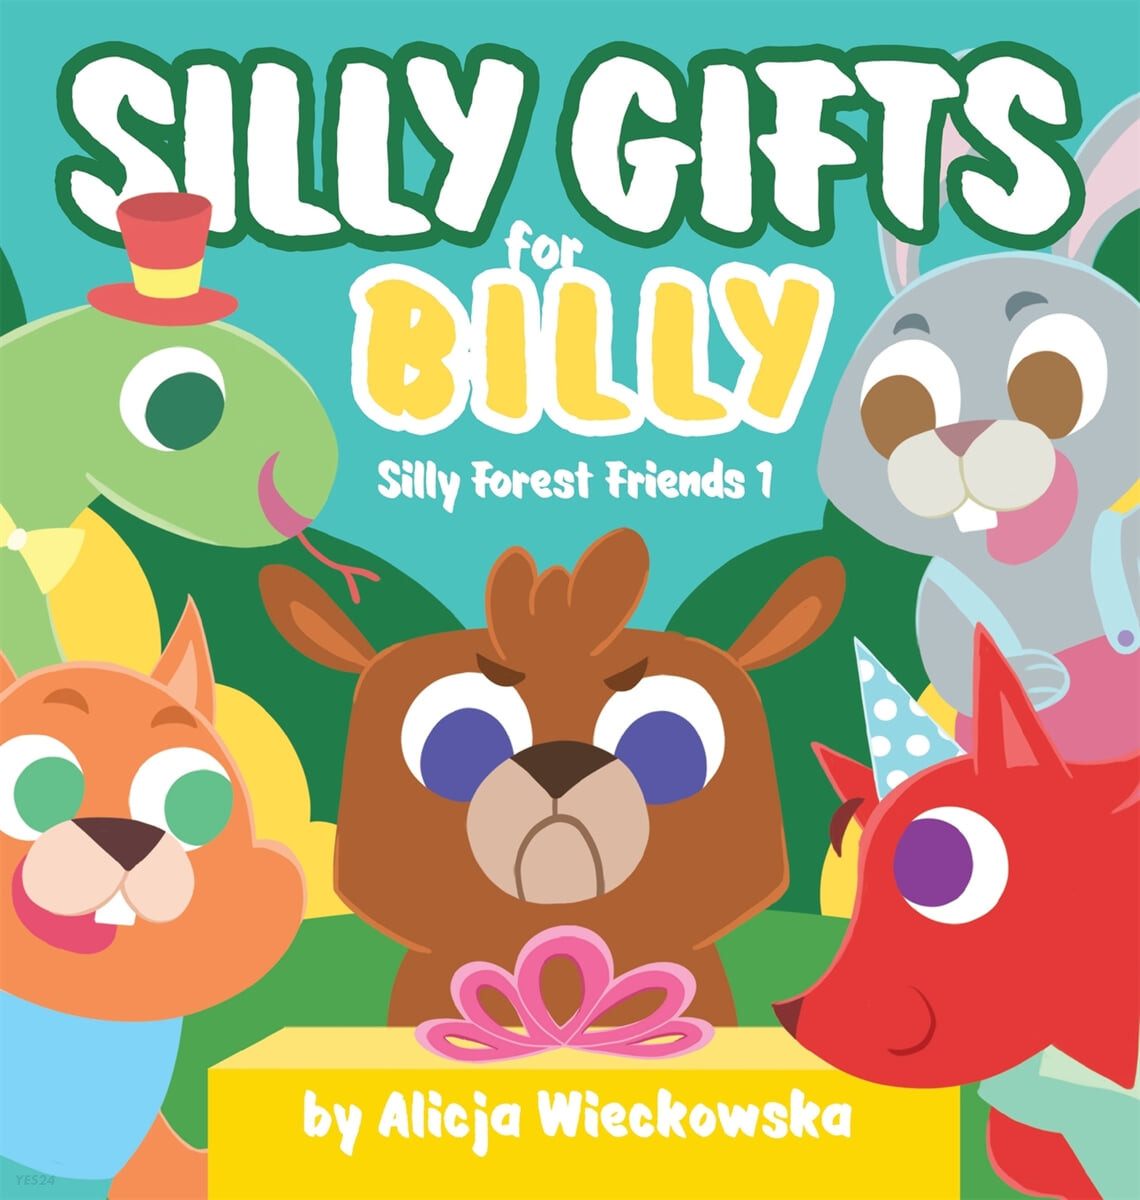 Silly gifts for Billy